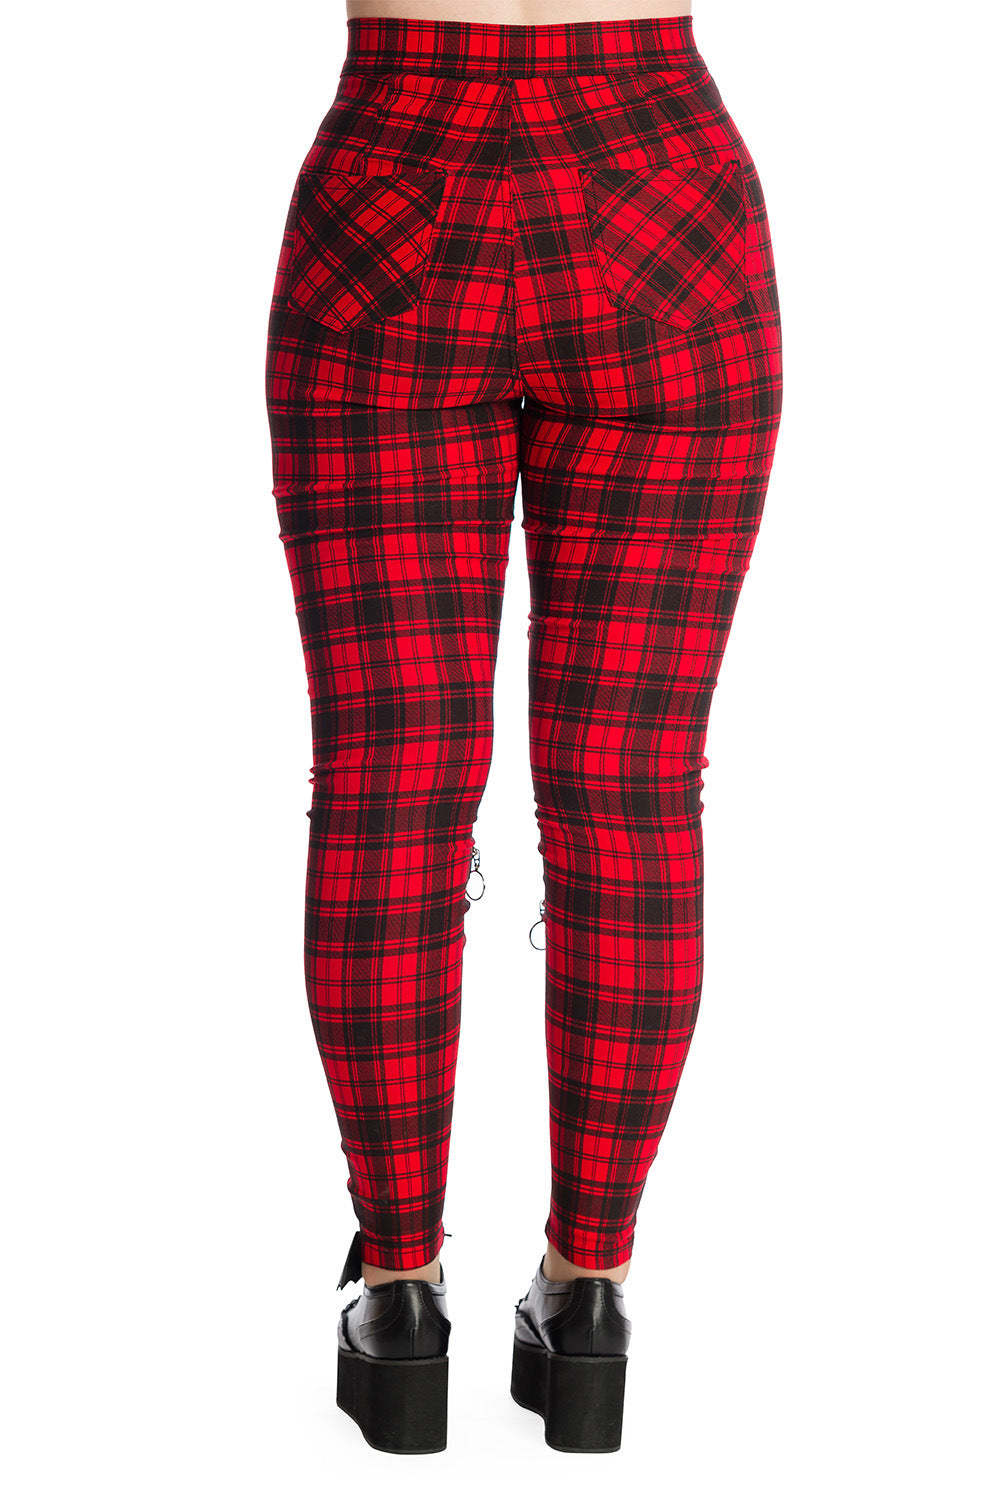 High waisted red check trousers with zip details on legs